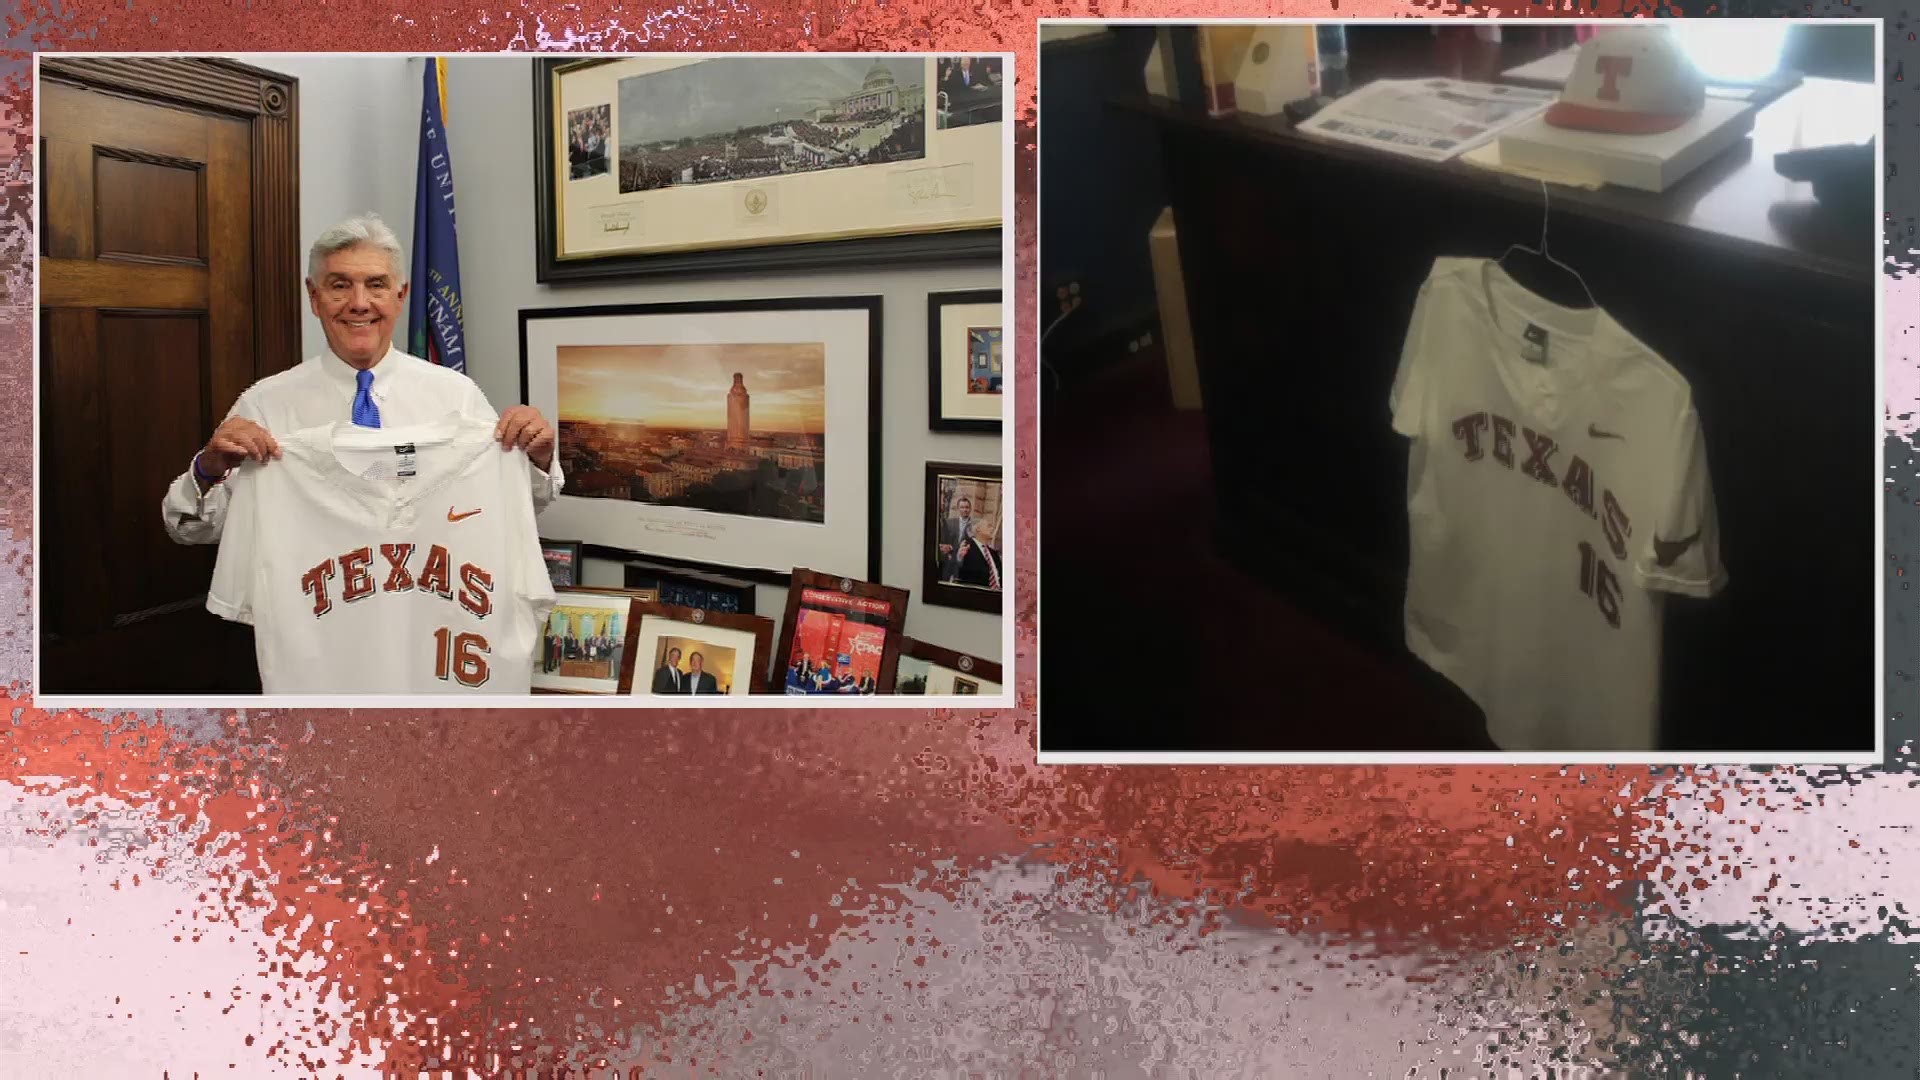 Williams will wear Augie Garrido's number 16 jersey for a portion of the Congressional Baseball game for charity Thursday night.